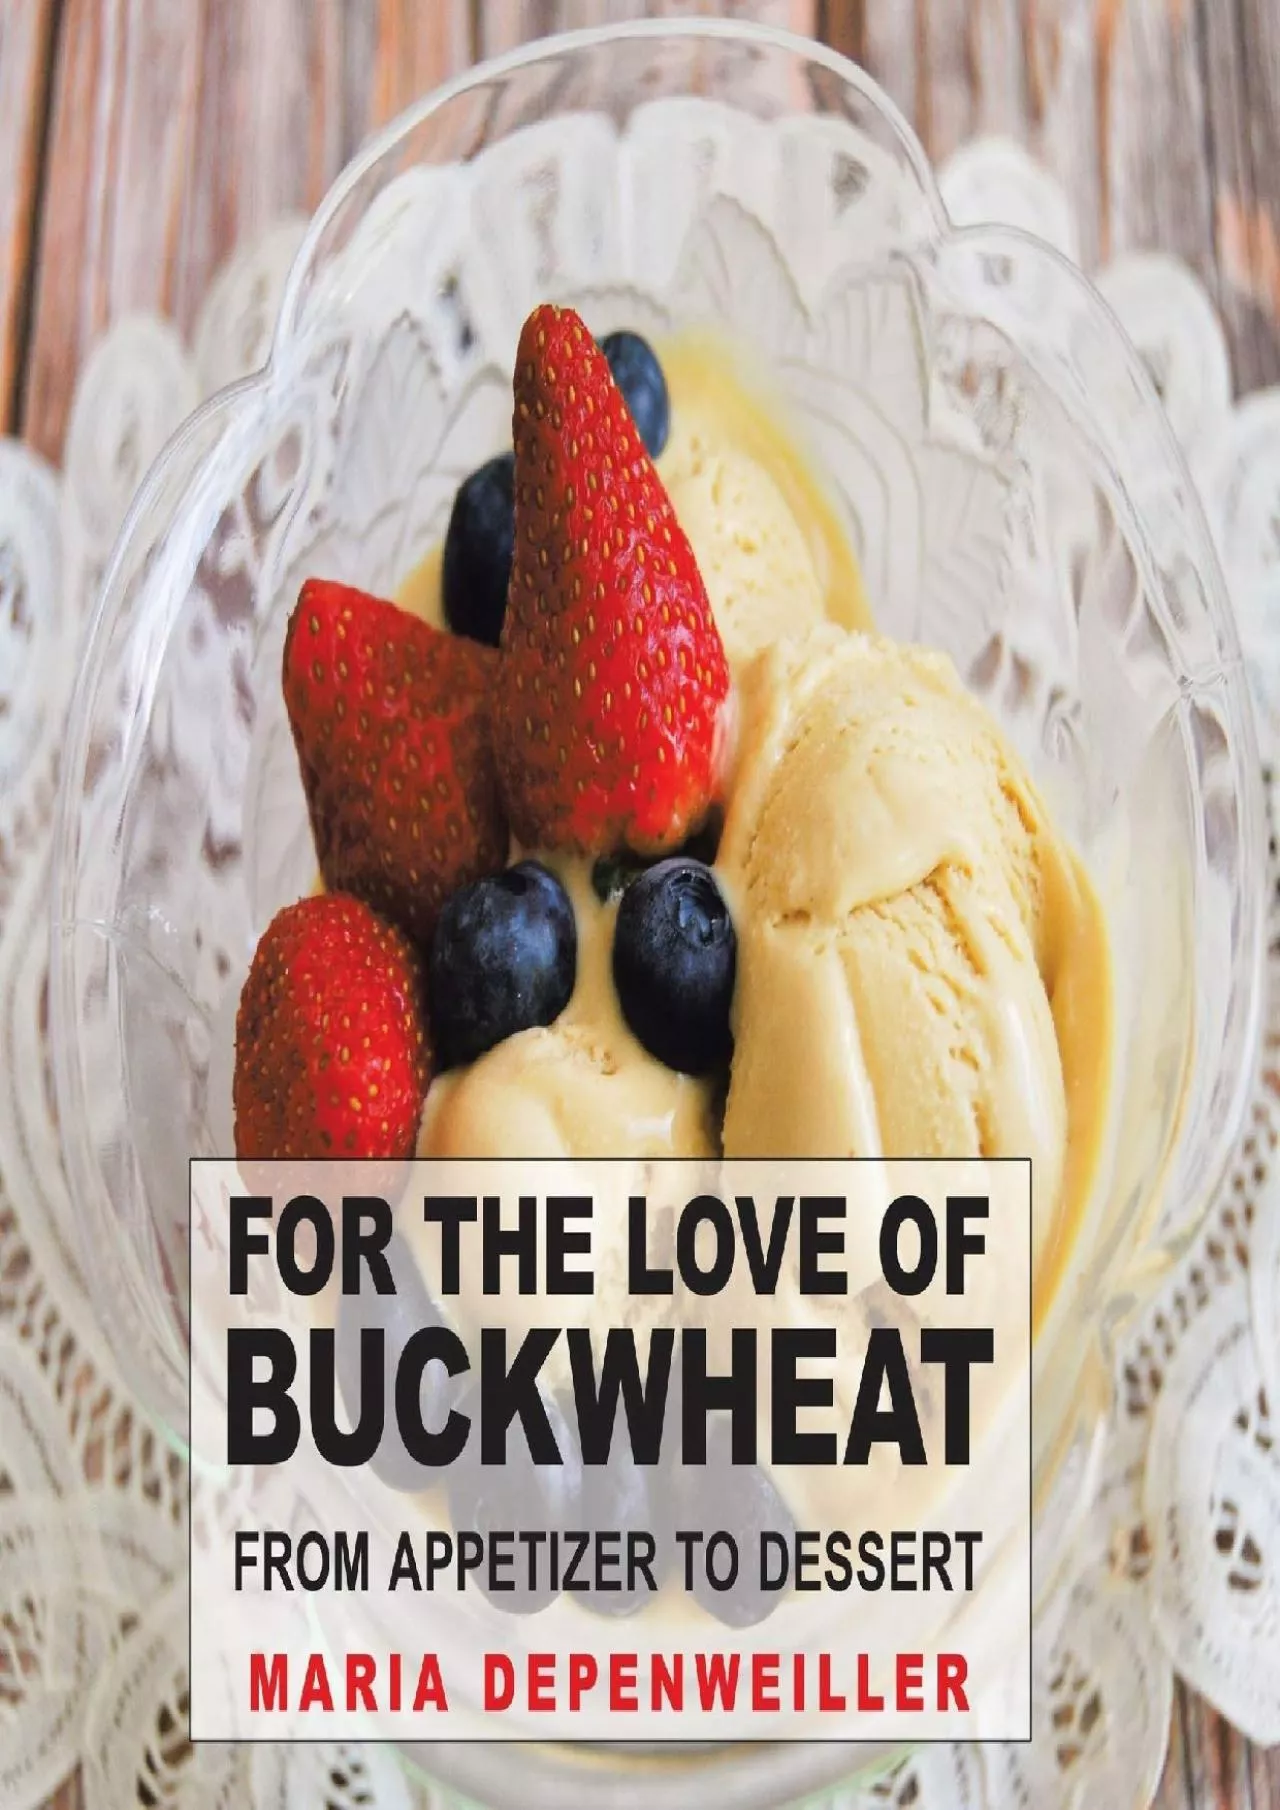 (BOOK)-For the Love of Buckwheat: From Appetizer to Dessert